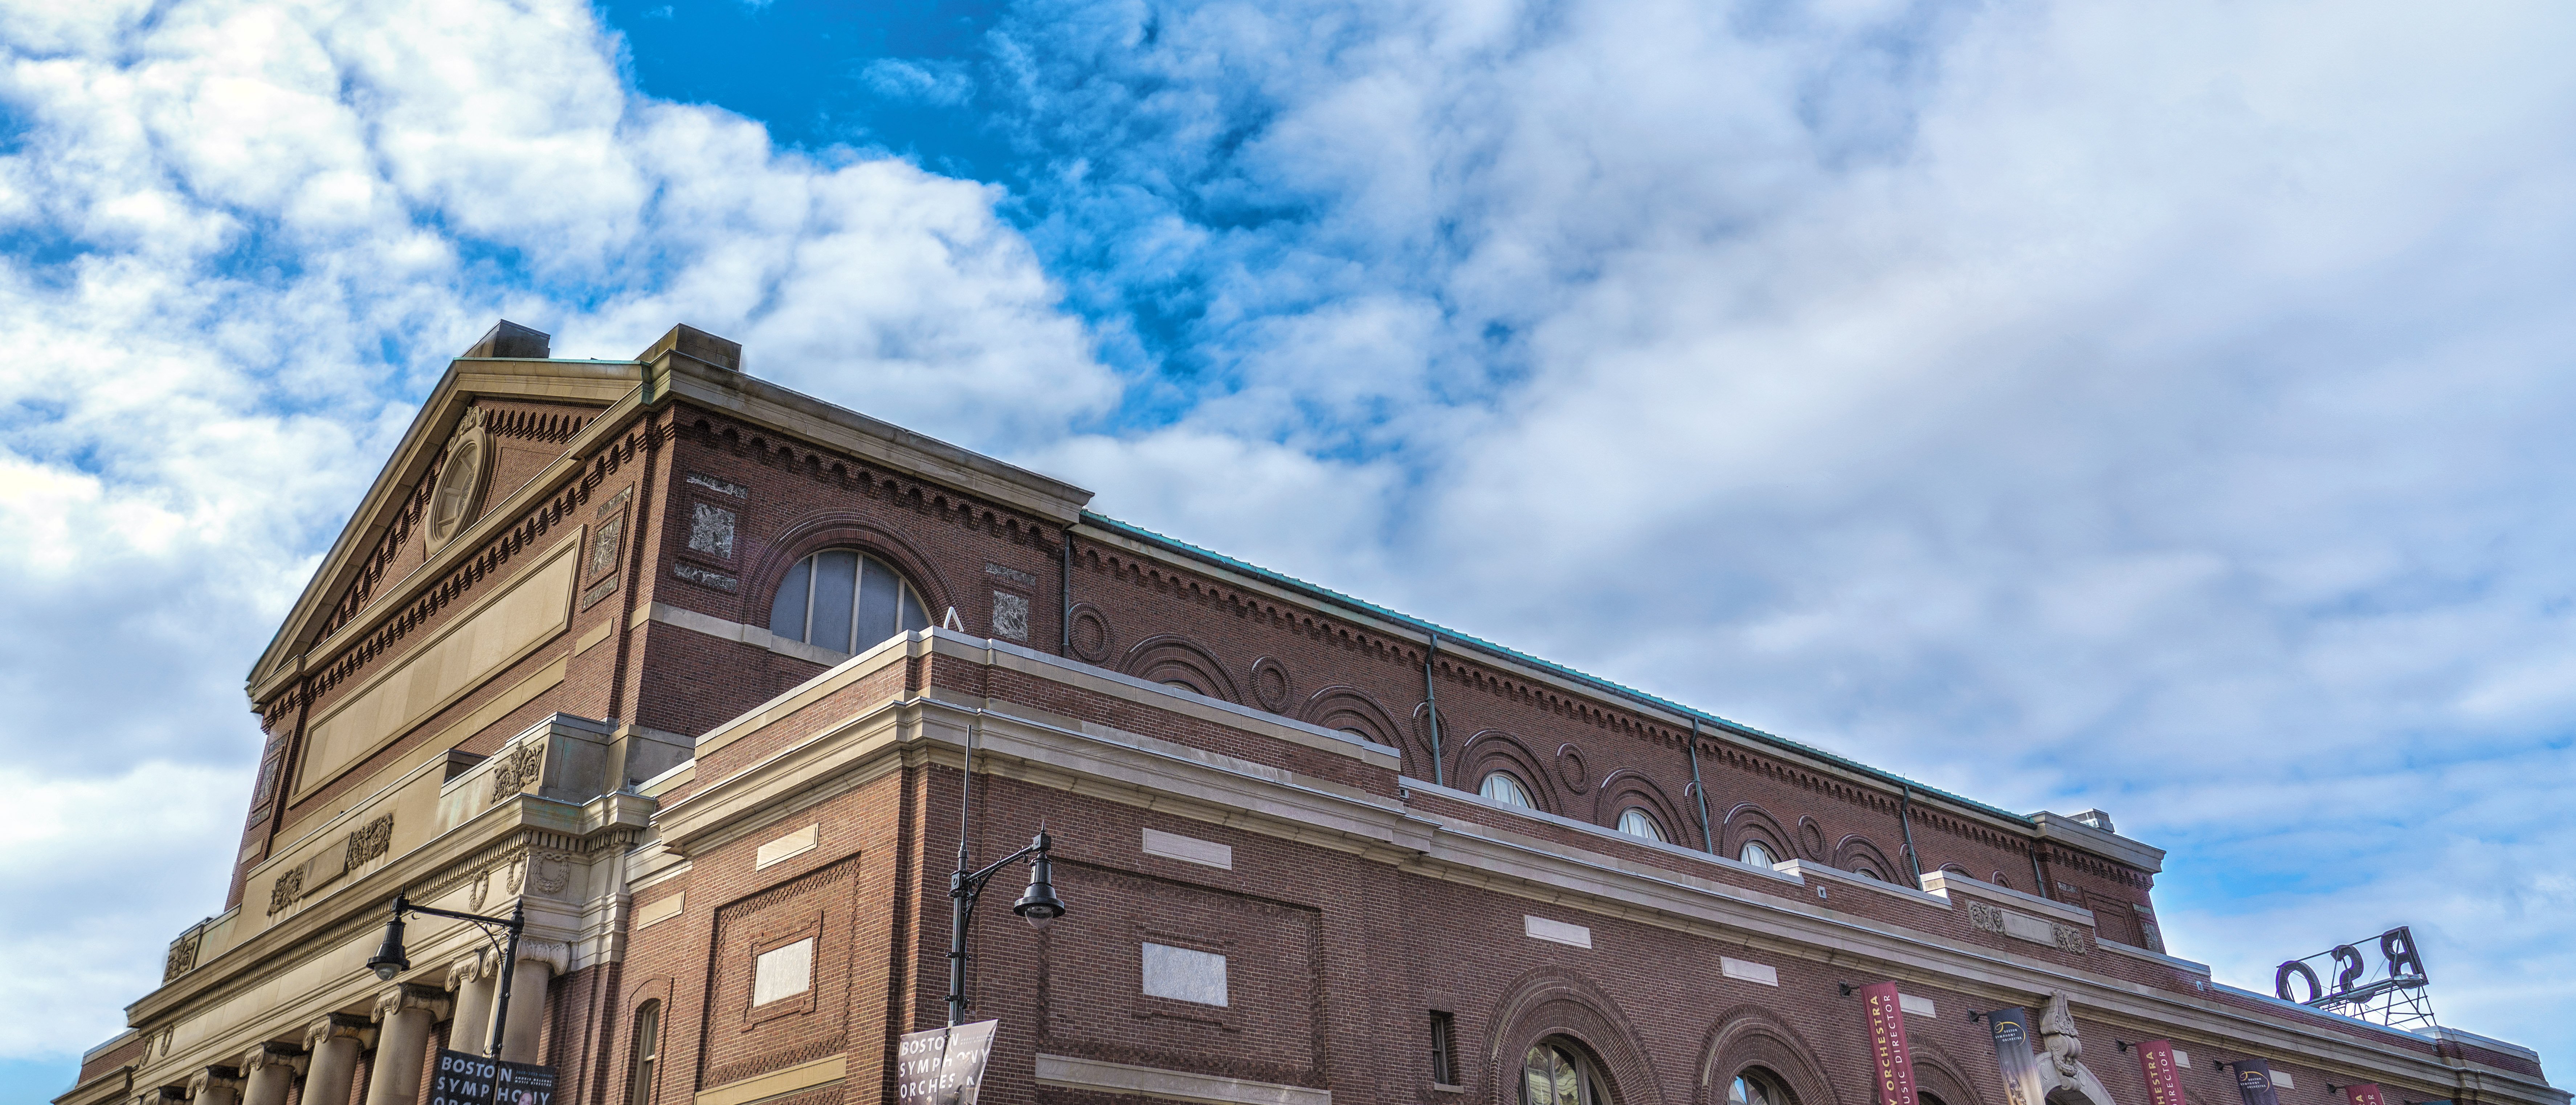 Upper part of the historic Boston Symphony Hall building